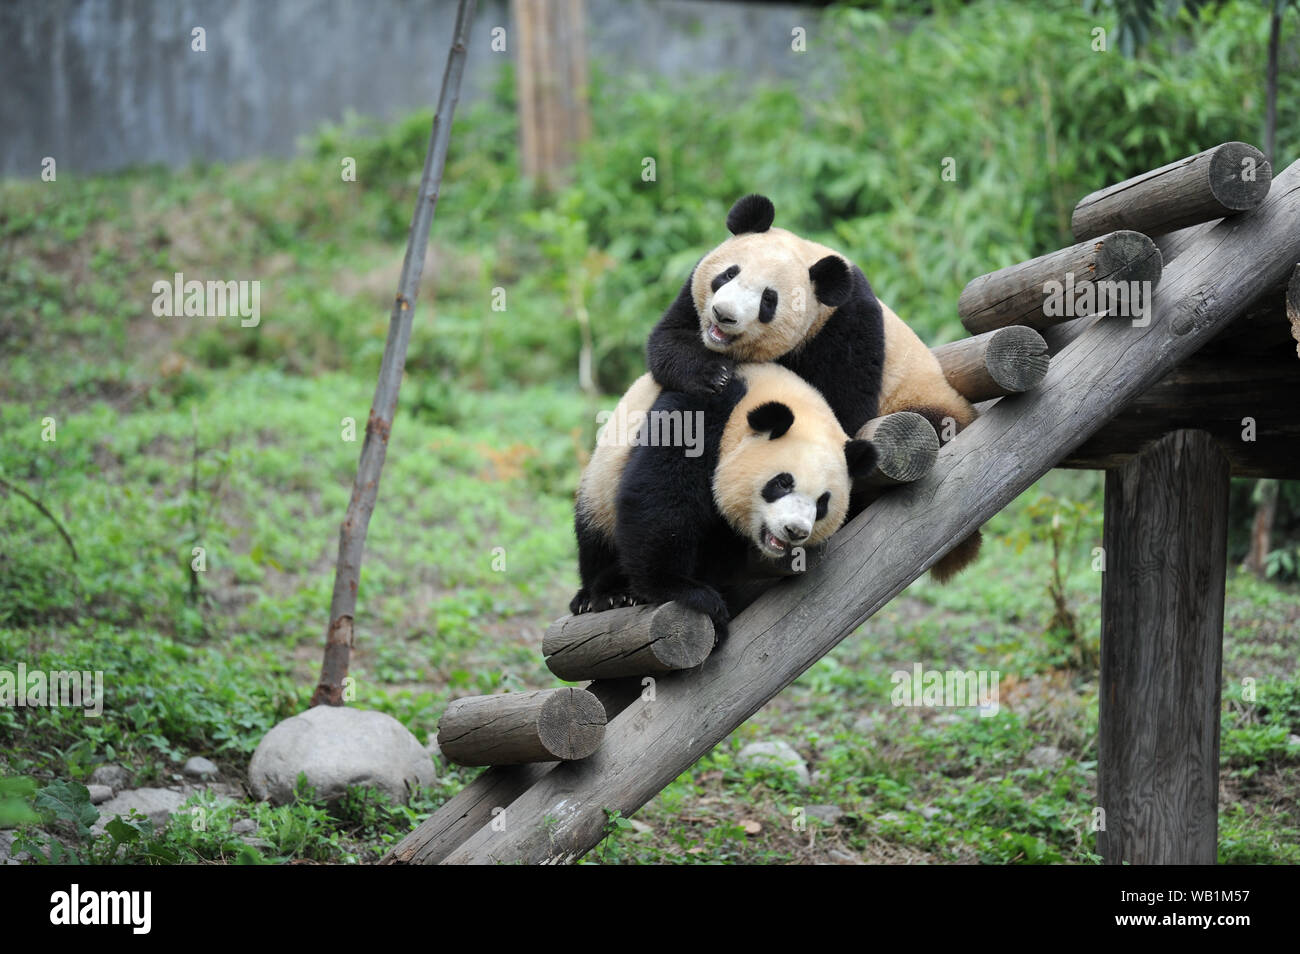 190823) -- BEIJING, Aug. 23, 2019 (Xinhua) -- Giant panda cubs Lu Lu (L)  and Qiang Sheng play at the Shaanxi Rare Wild Animals Rescue and Breeding  Research Center in northwest China's